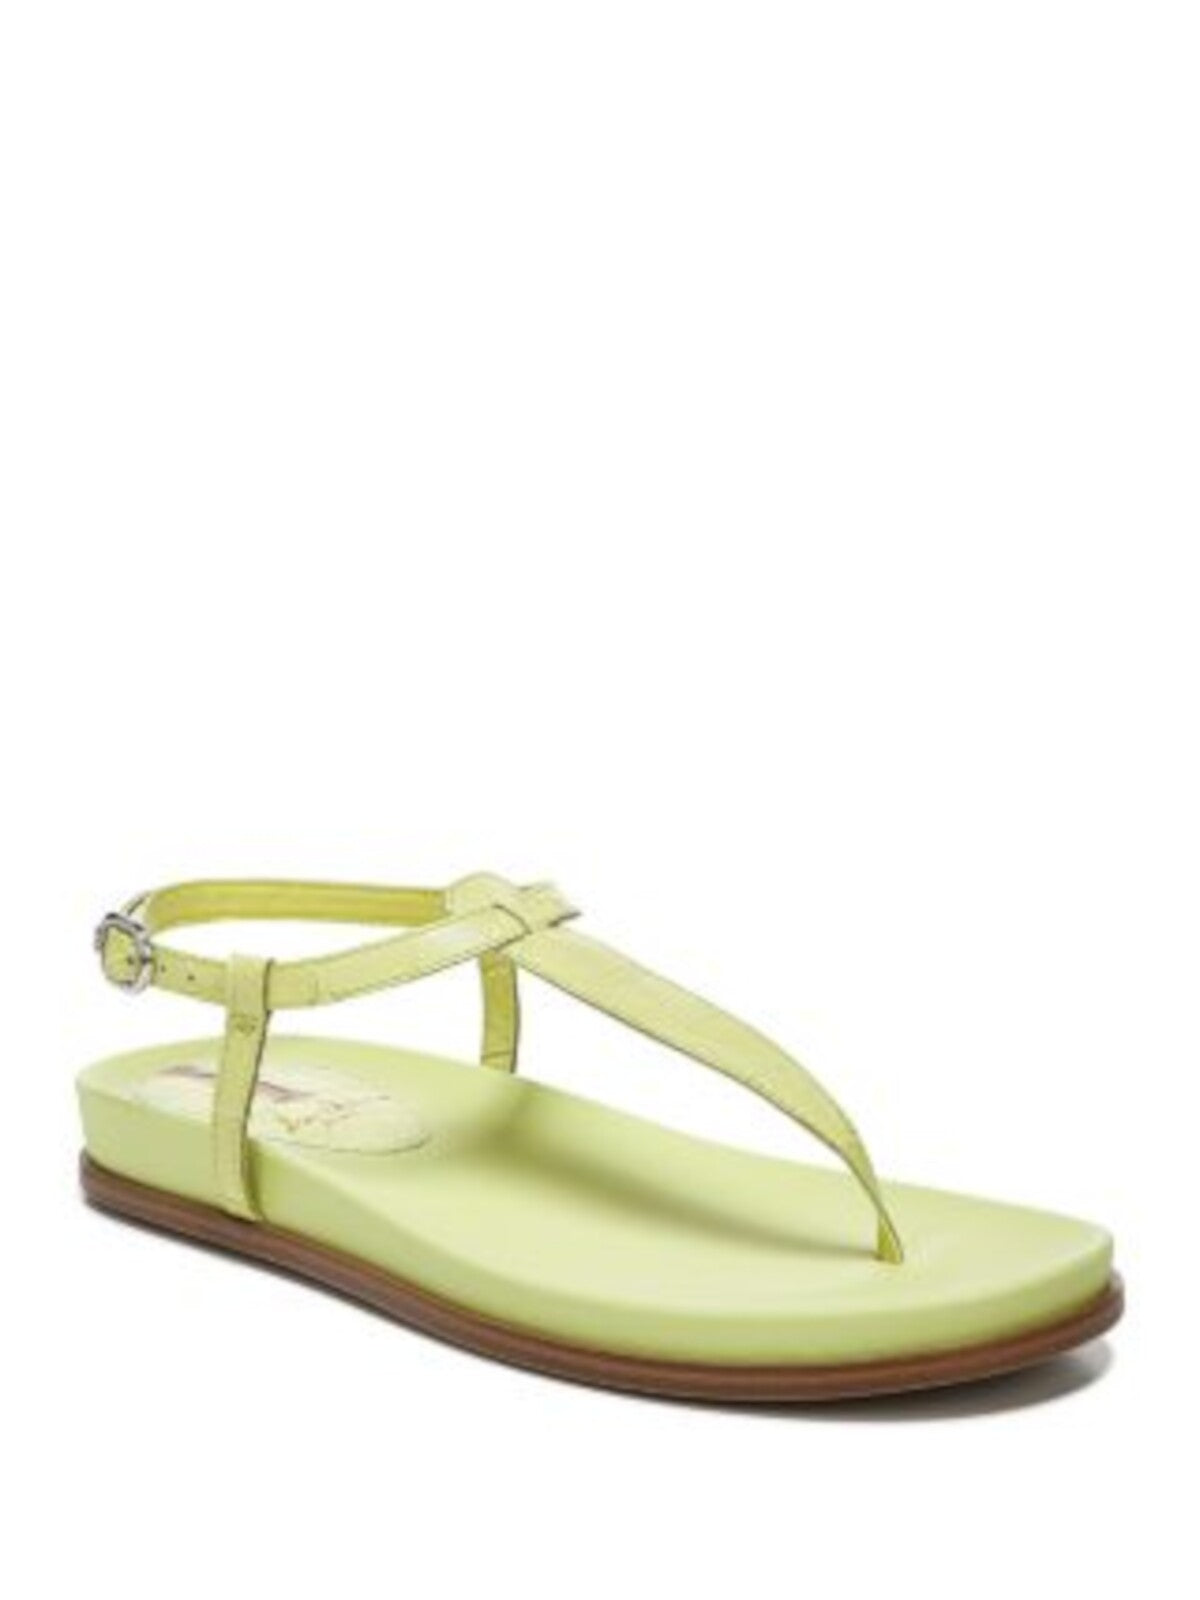 SAM EDELMAN NEW YORK Womens Green Croc Upper Cushioned T-Strap Naomi Round Toe Wedge Buckle Leather Thong Sandals Shoes 8.5 M